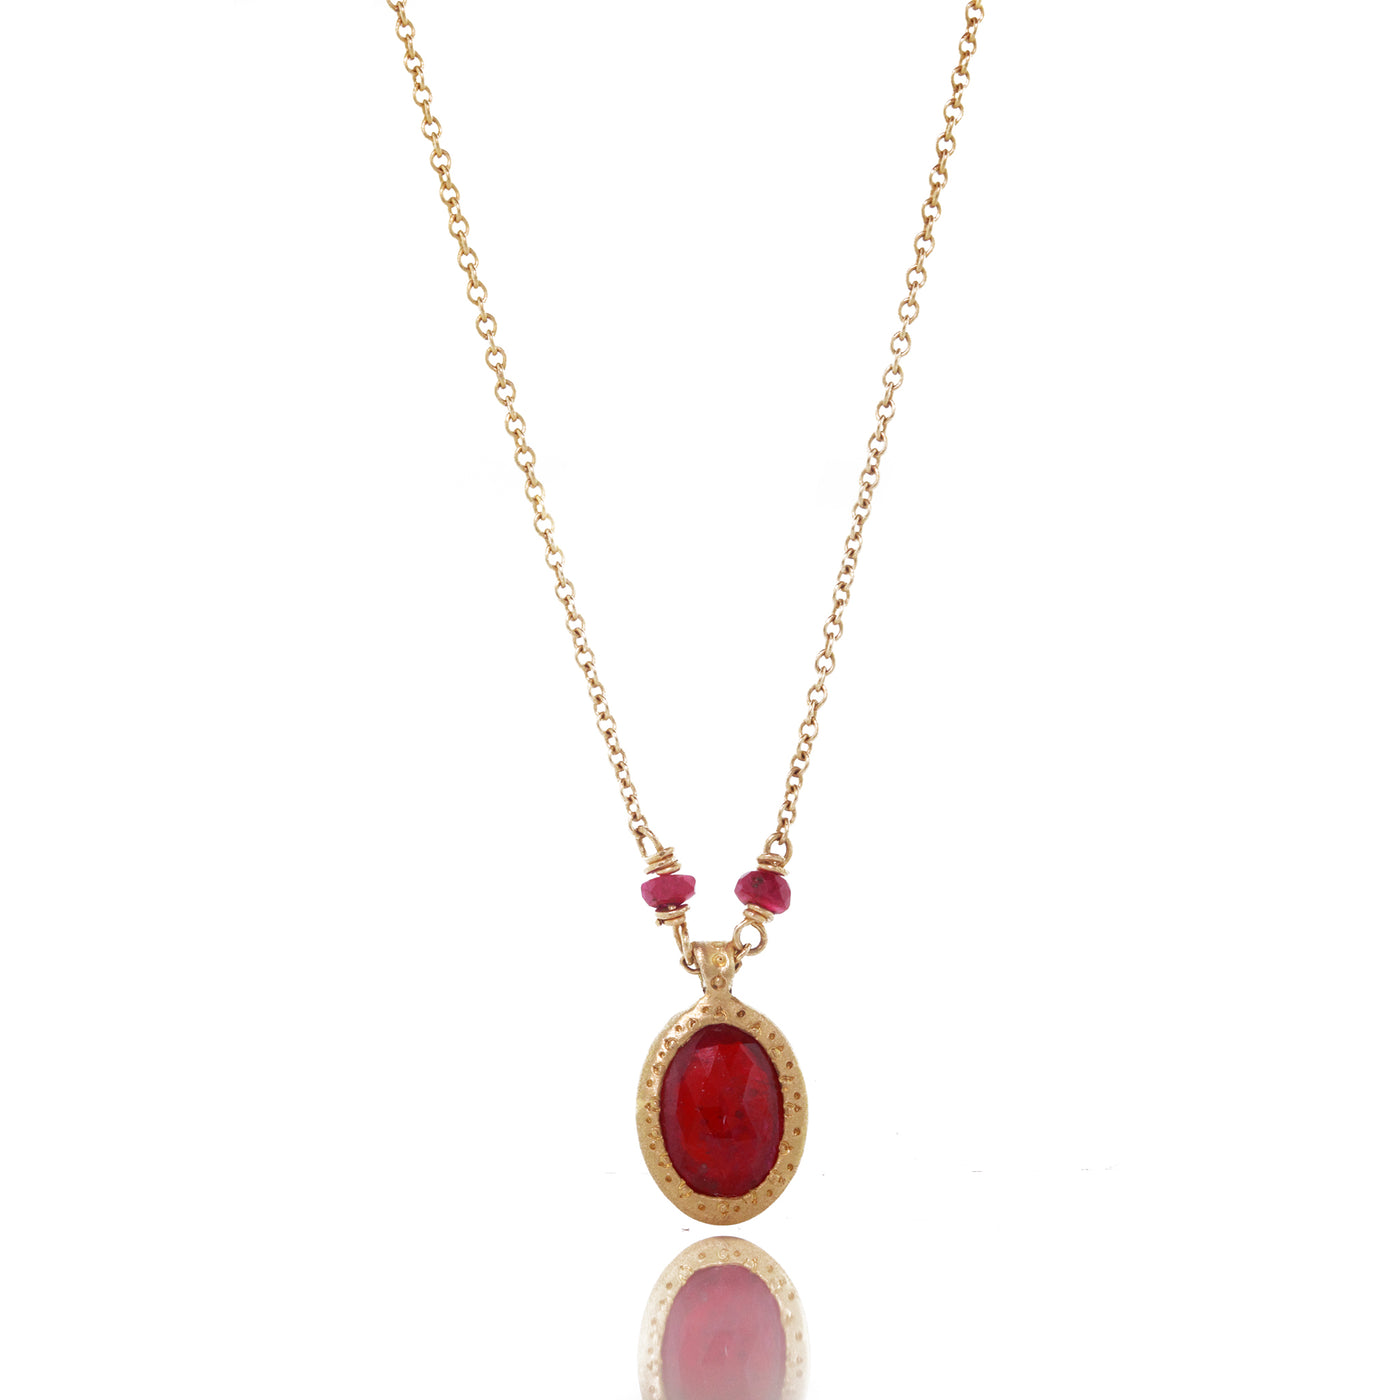 Ruby Pendant with Beads